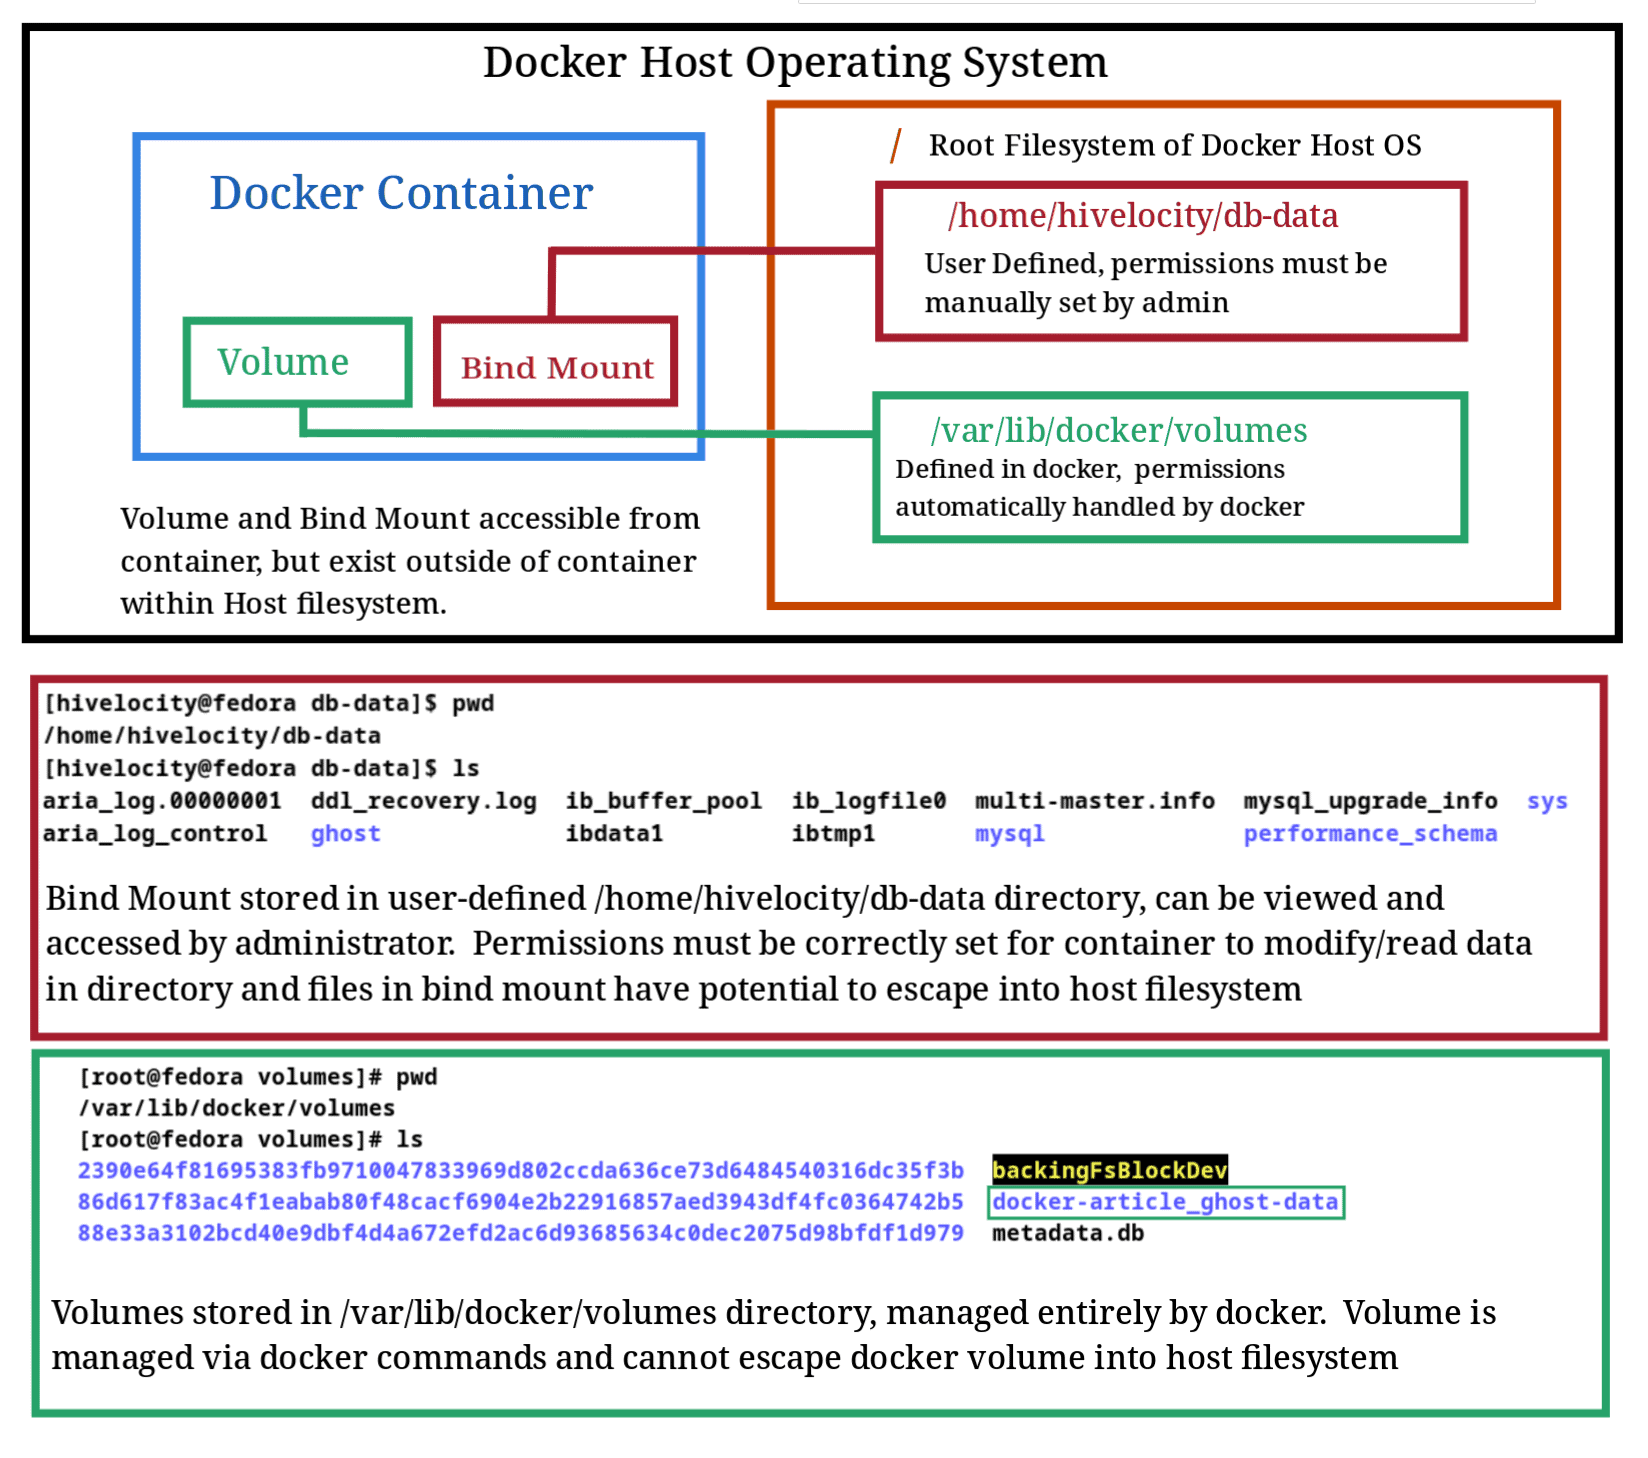 Chart showing the interconnectedness of a Docker container and the root filesystem of the Docker Host OS